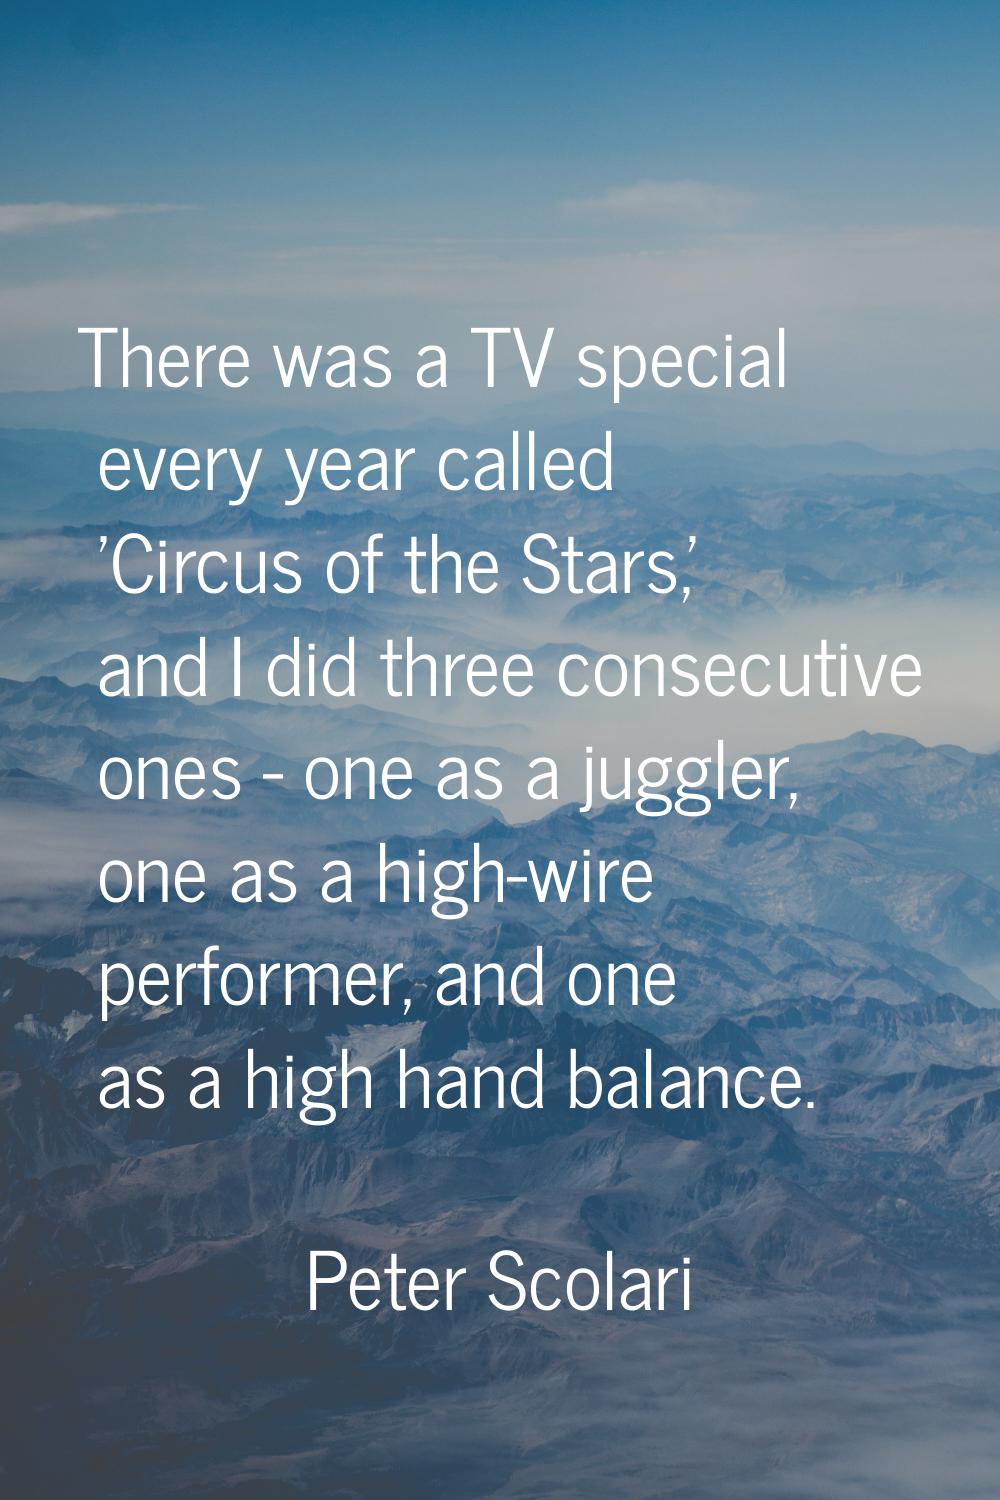 There was a TV special every year called 'Circus of the Stars,' and I did three consecutive ones - 